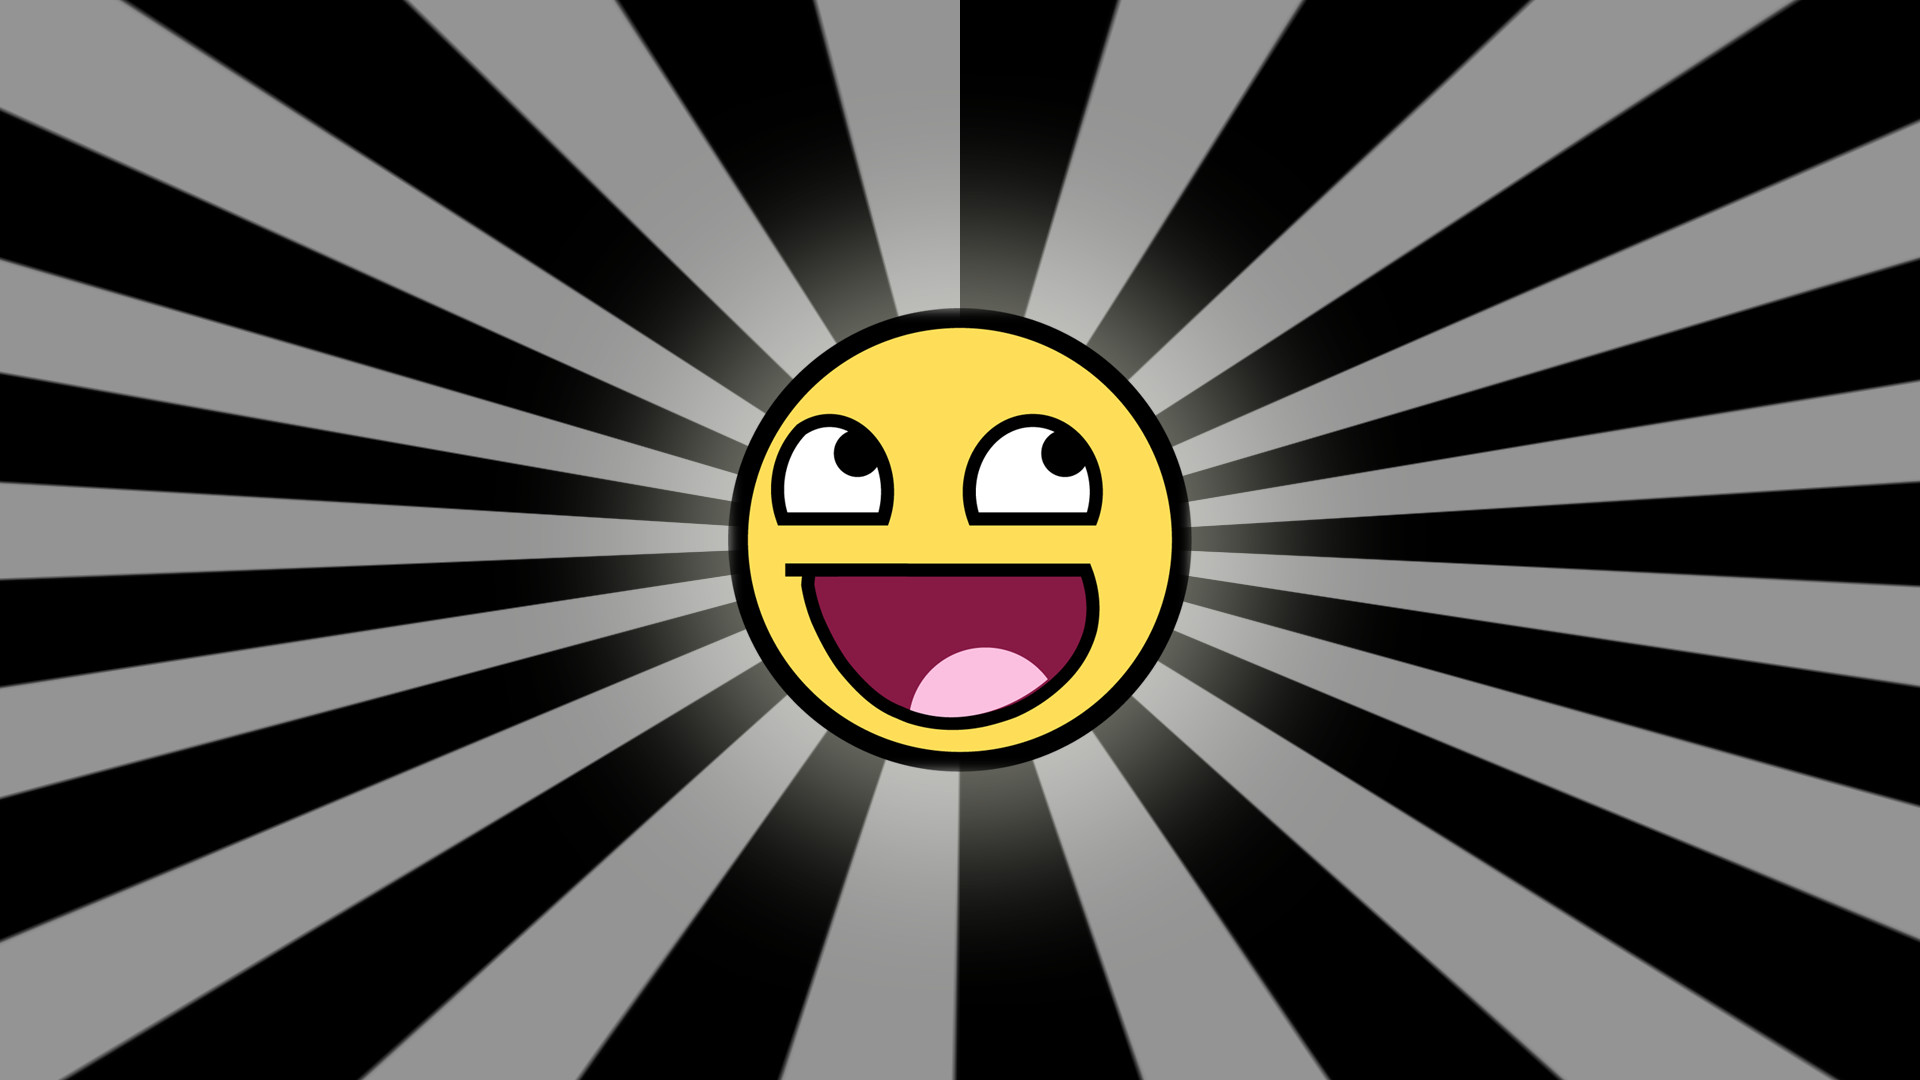 Awesome face 502547 walldevil awesome face images awesome face hd wallpaper and background